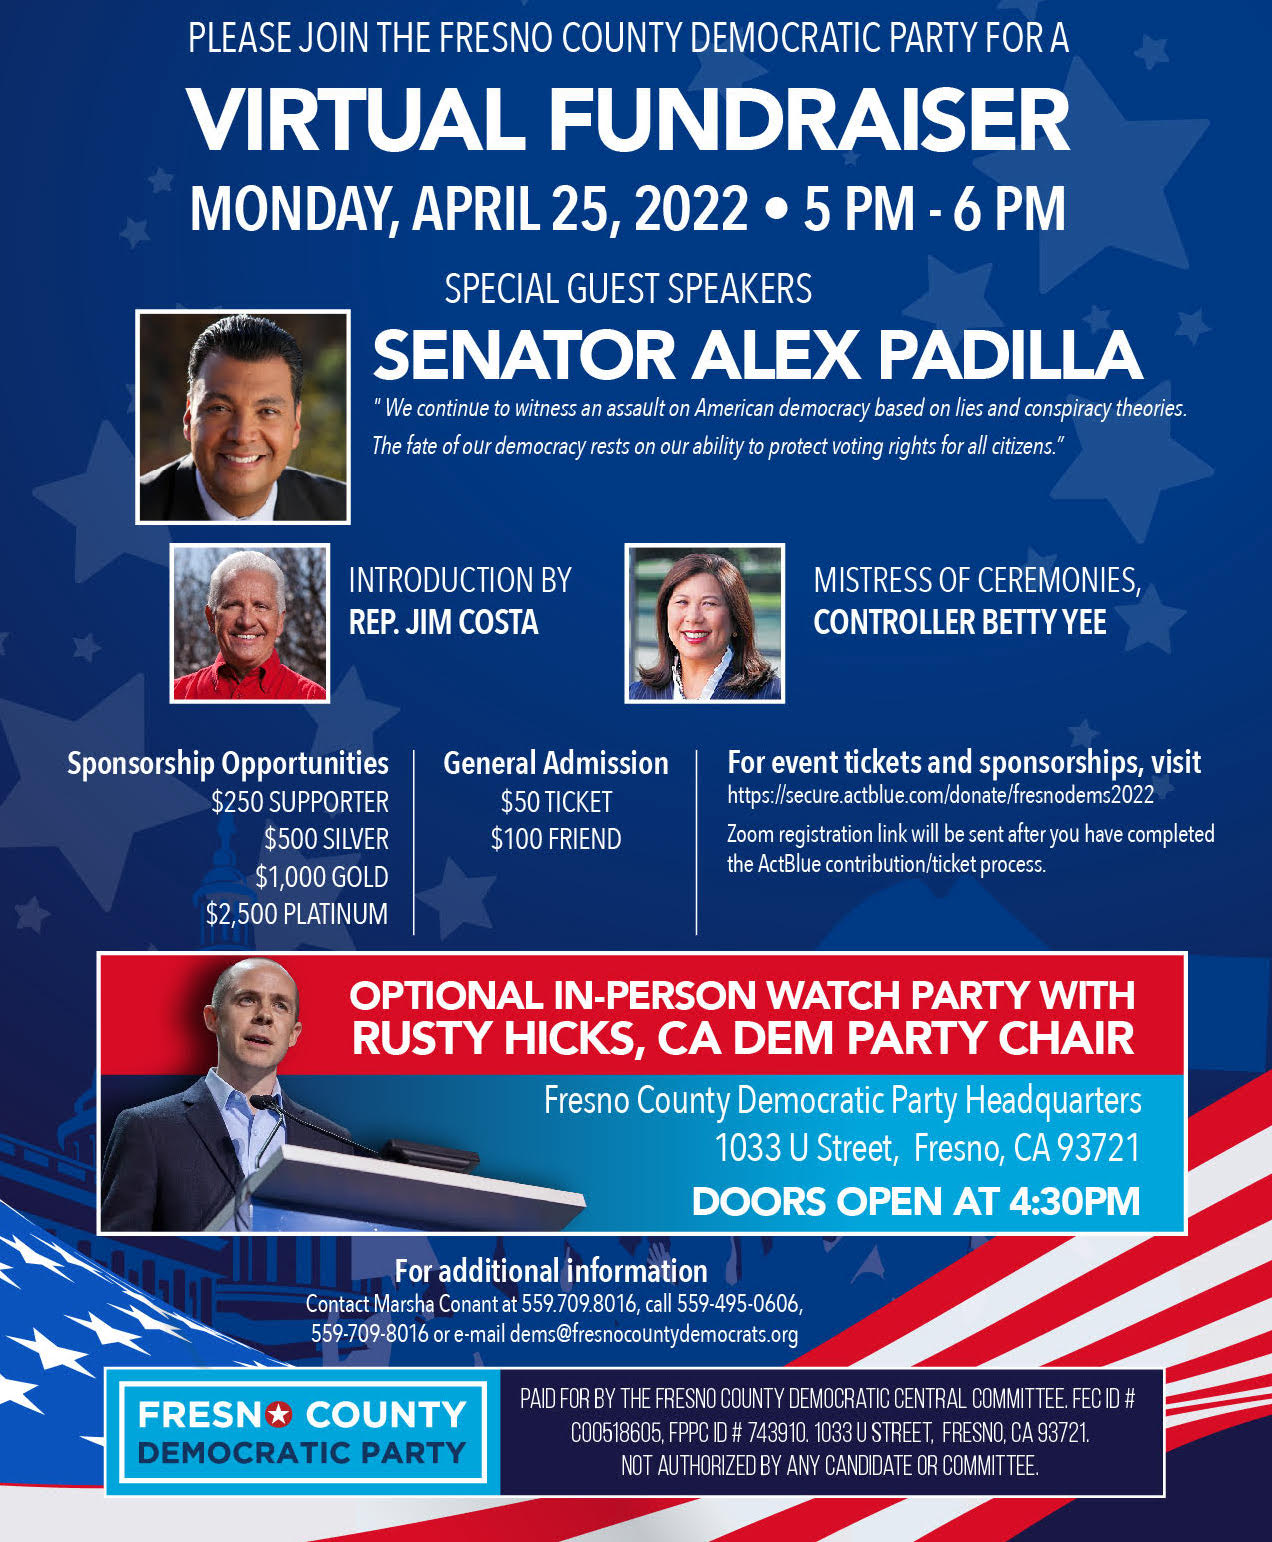 You are currently viewing Fundraiser Monday, April 25 5 PM join via Zoom or in-person watch party at Dem HQ with CADEM Chair Rusty Hicks